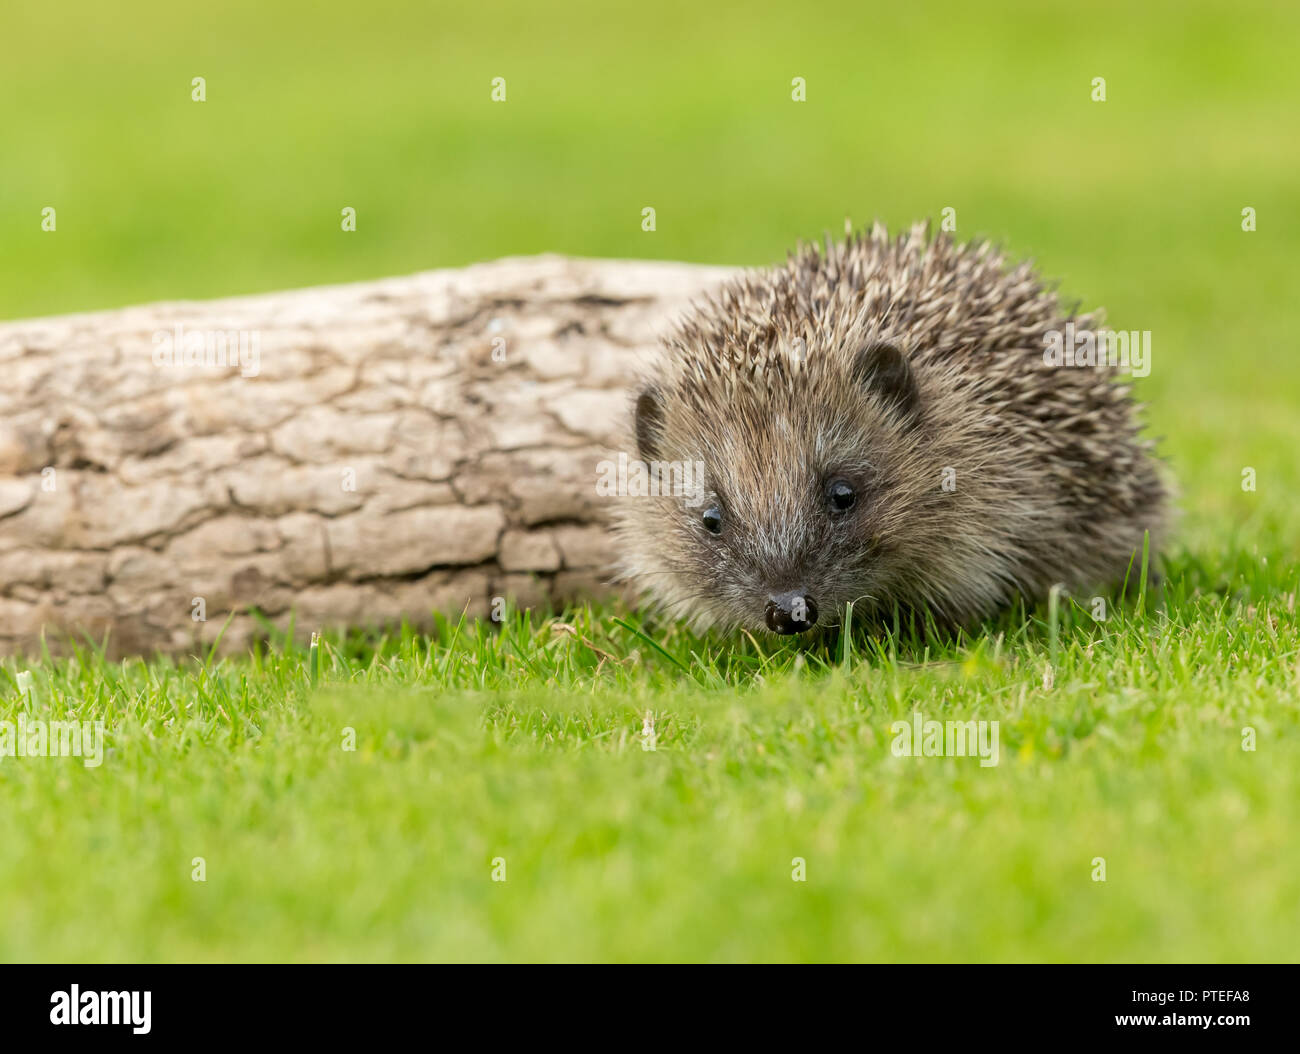 Hedgehog, (Erinaceous Europaeus) wild, native hedgehog in natural garden habitat on green grass lawn facing to the front.  Horizontal. Stock Photo